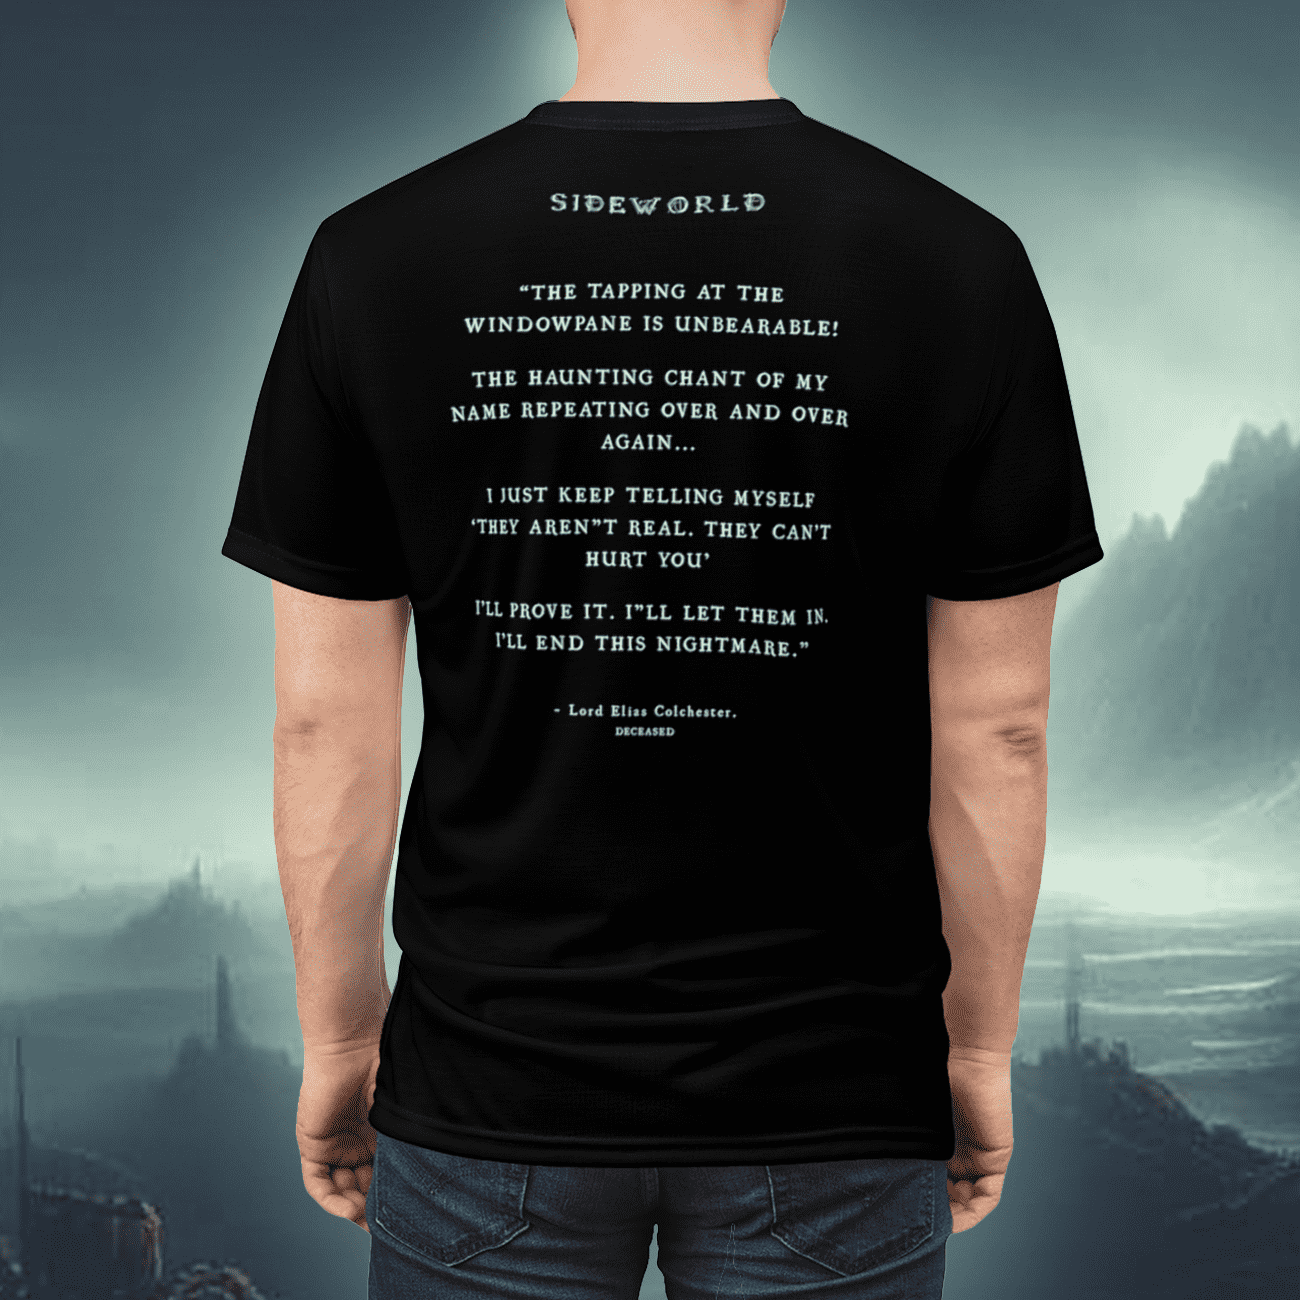 Gothic horror art t-shirt of a creepy haunted scene with ghosts in the fog, an original Horror story from The Broken Realm.